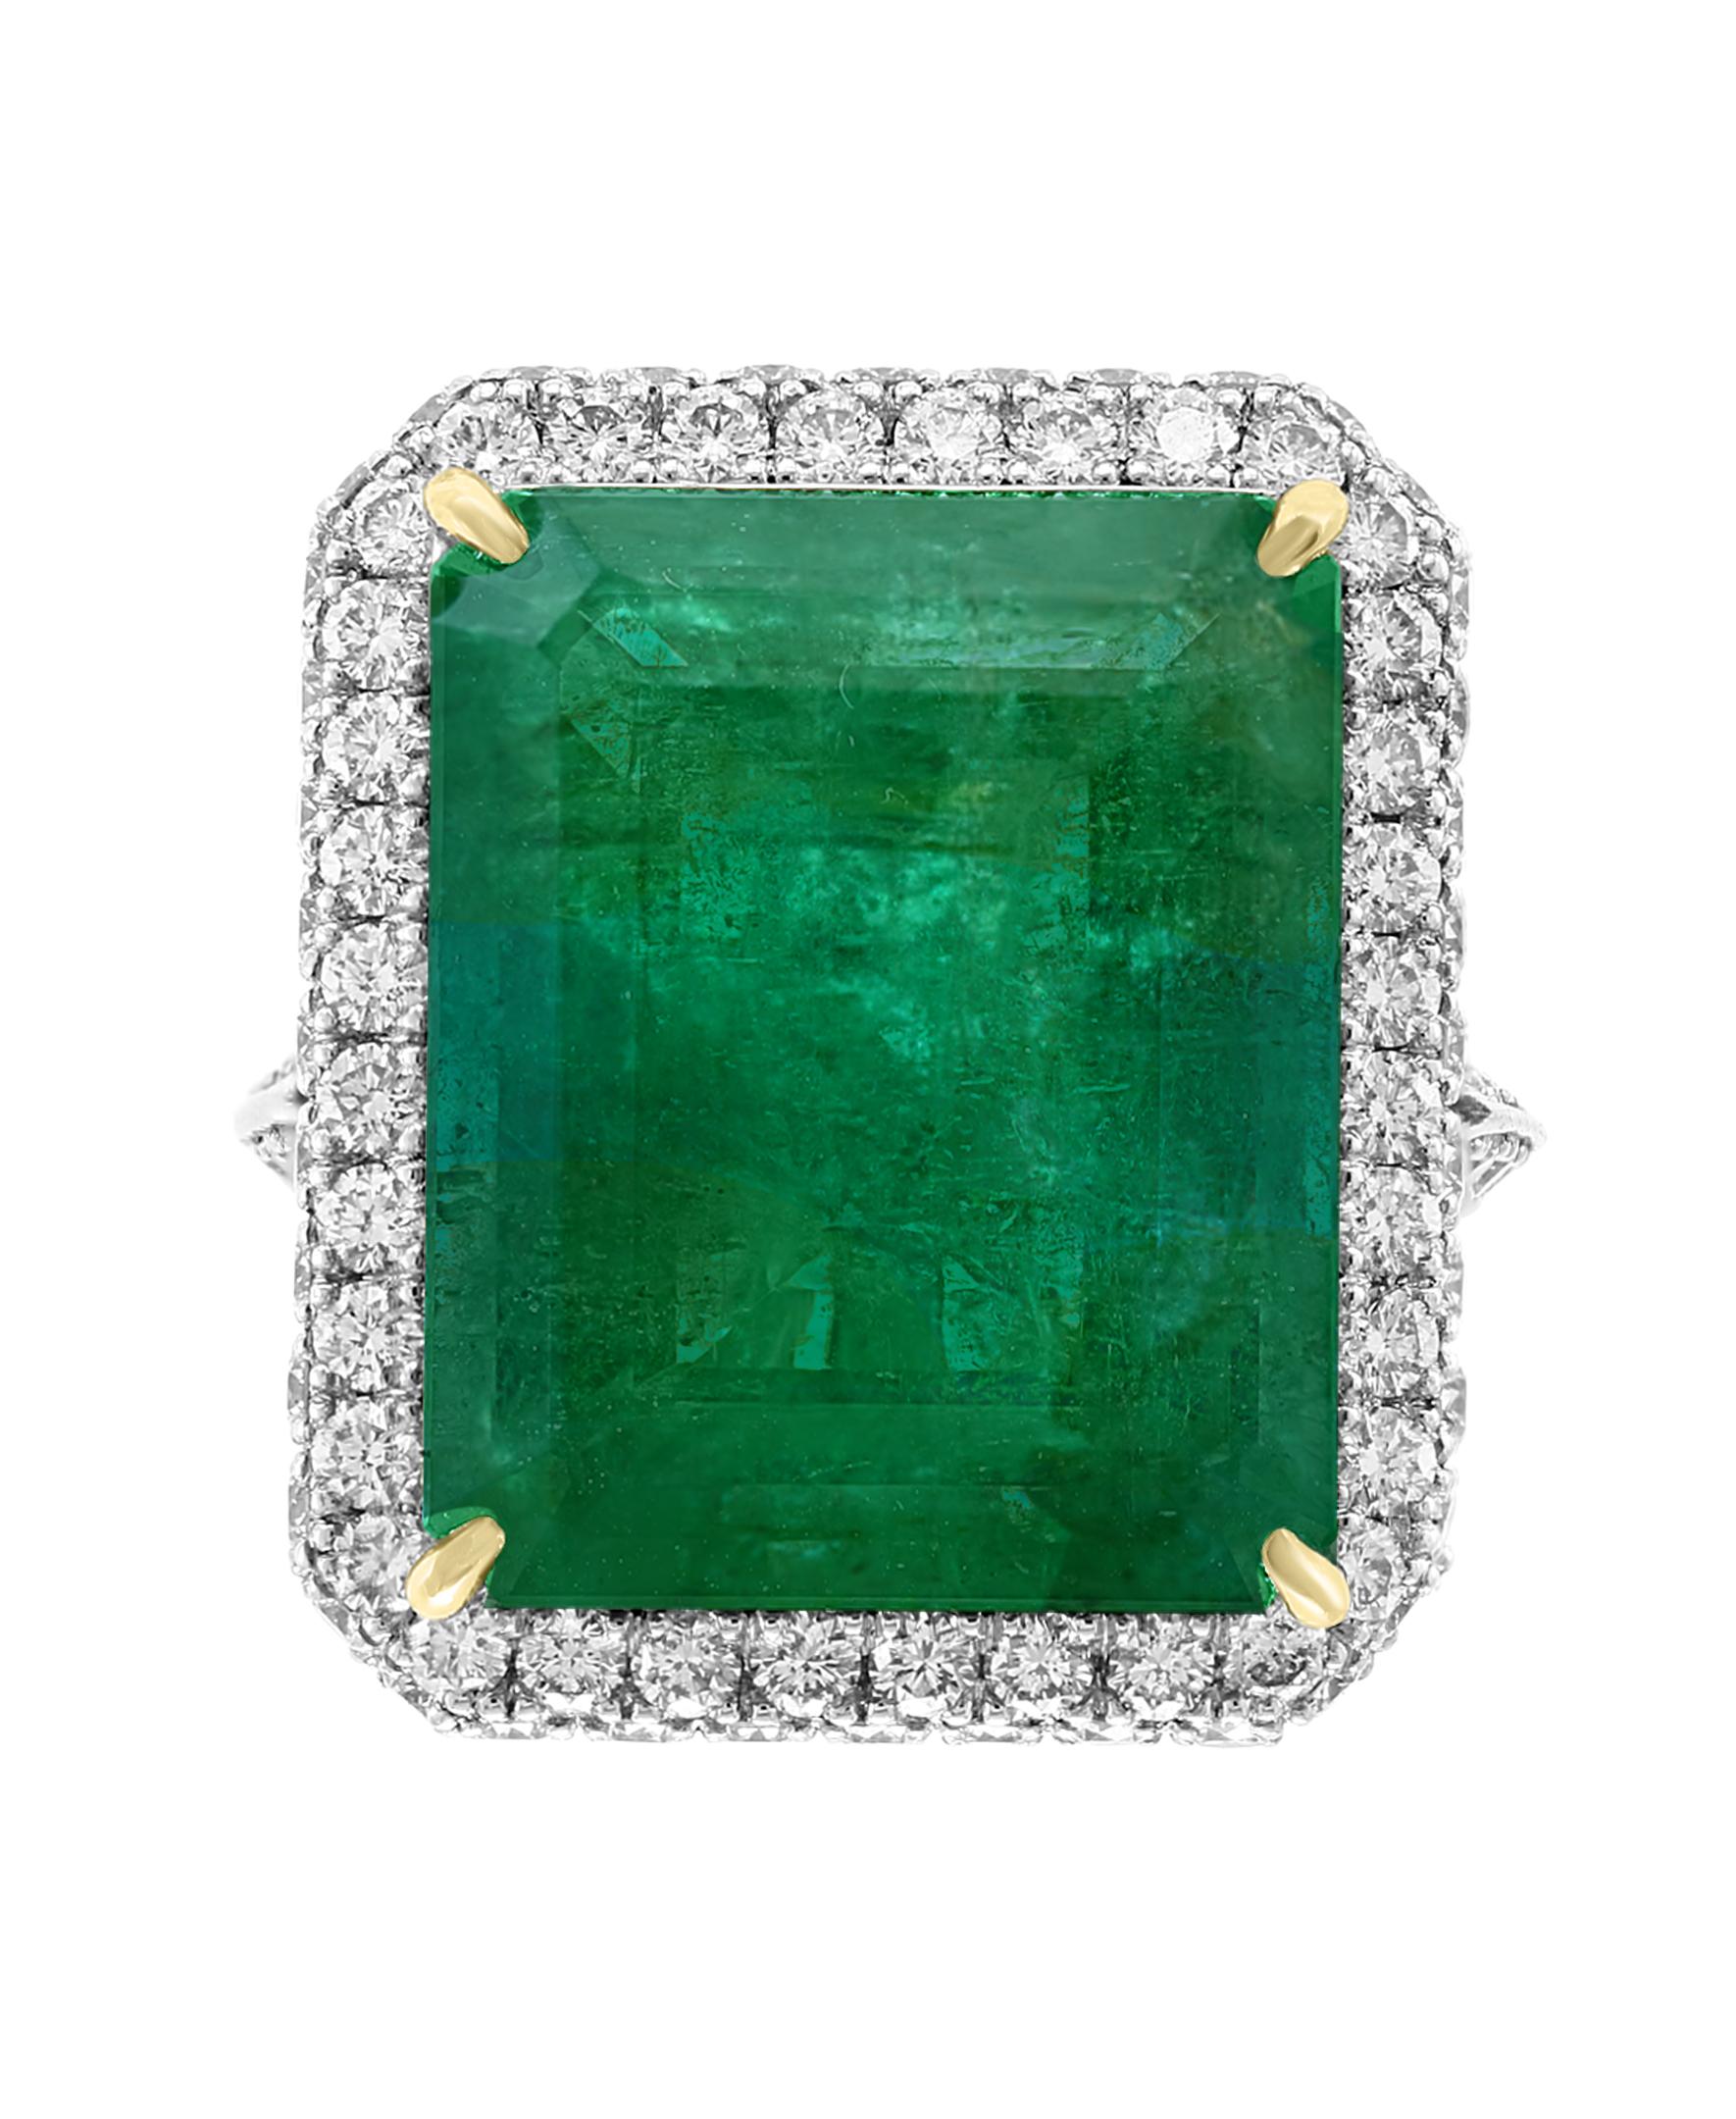 AGL Certified 13.10 Ct Emerald Cut Colombian Emerald Diamond 18K Gold Ring In Excellent Condition For Sale In New York, NY